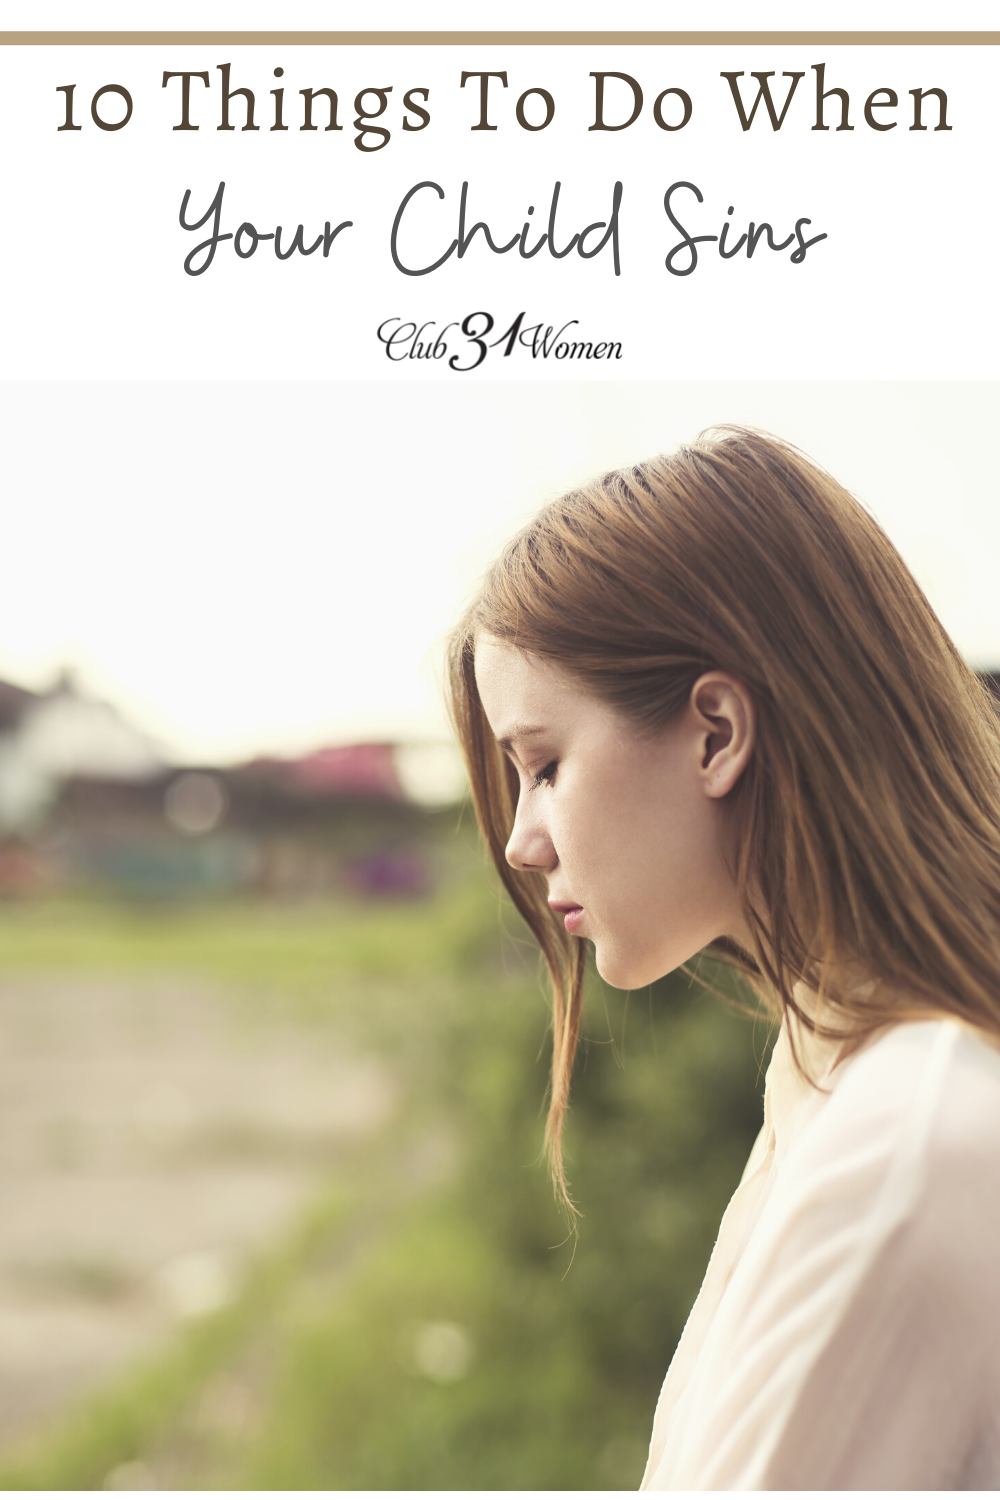 How can we respond with wisdom when our child sins? Reacting will not help draw them close but rather push them away. Here are 10 things we can do. via @Club31Women